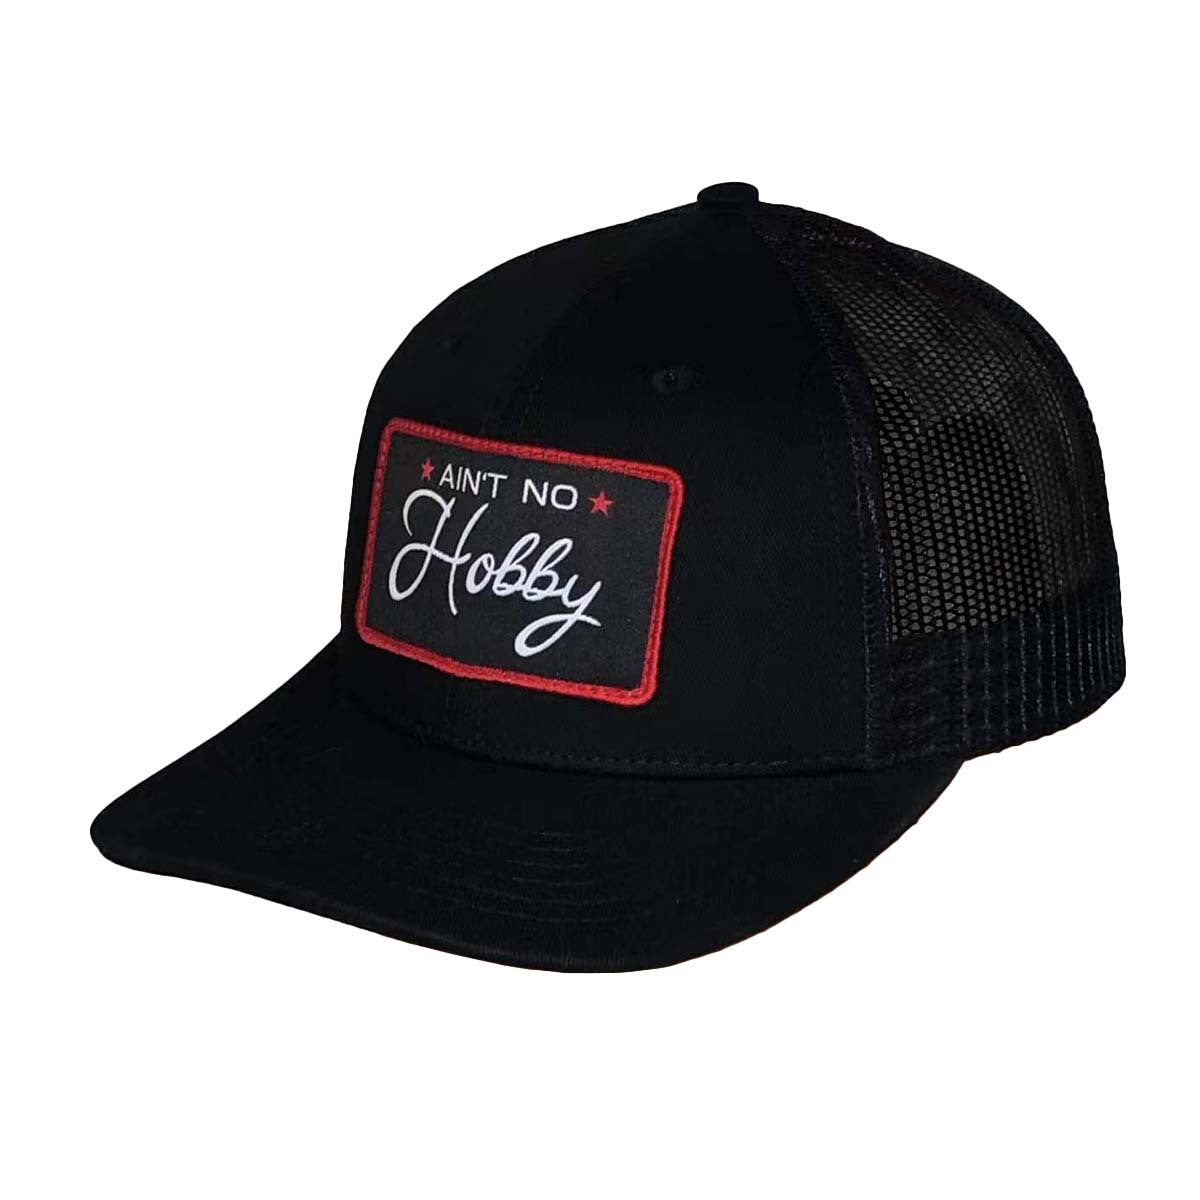 Barstool Golf Ain't No Hobby Patch Trucker Hat-Hats-Fore Play-Black-One Size-Barstool Sports